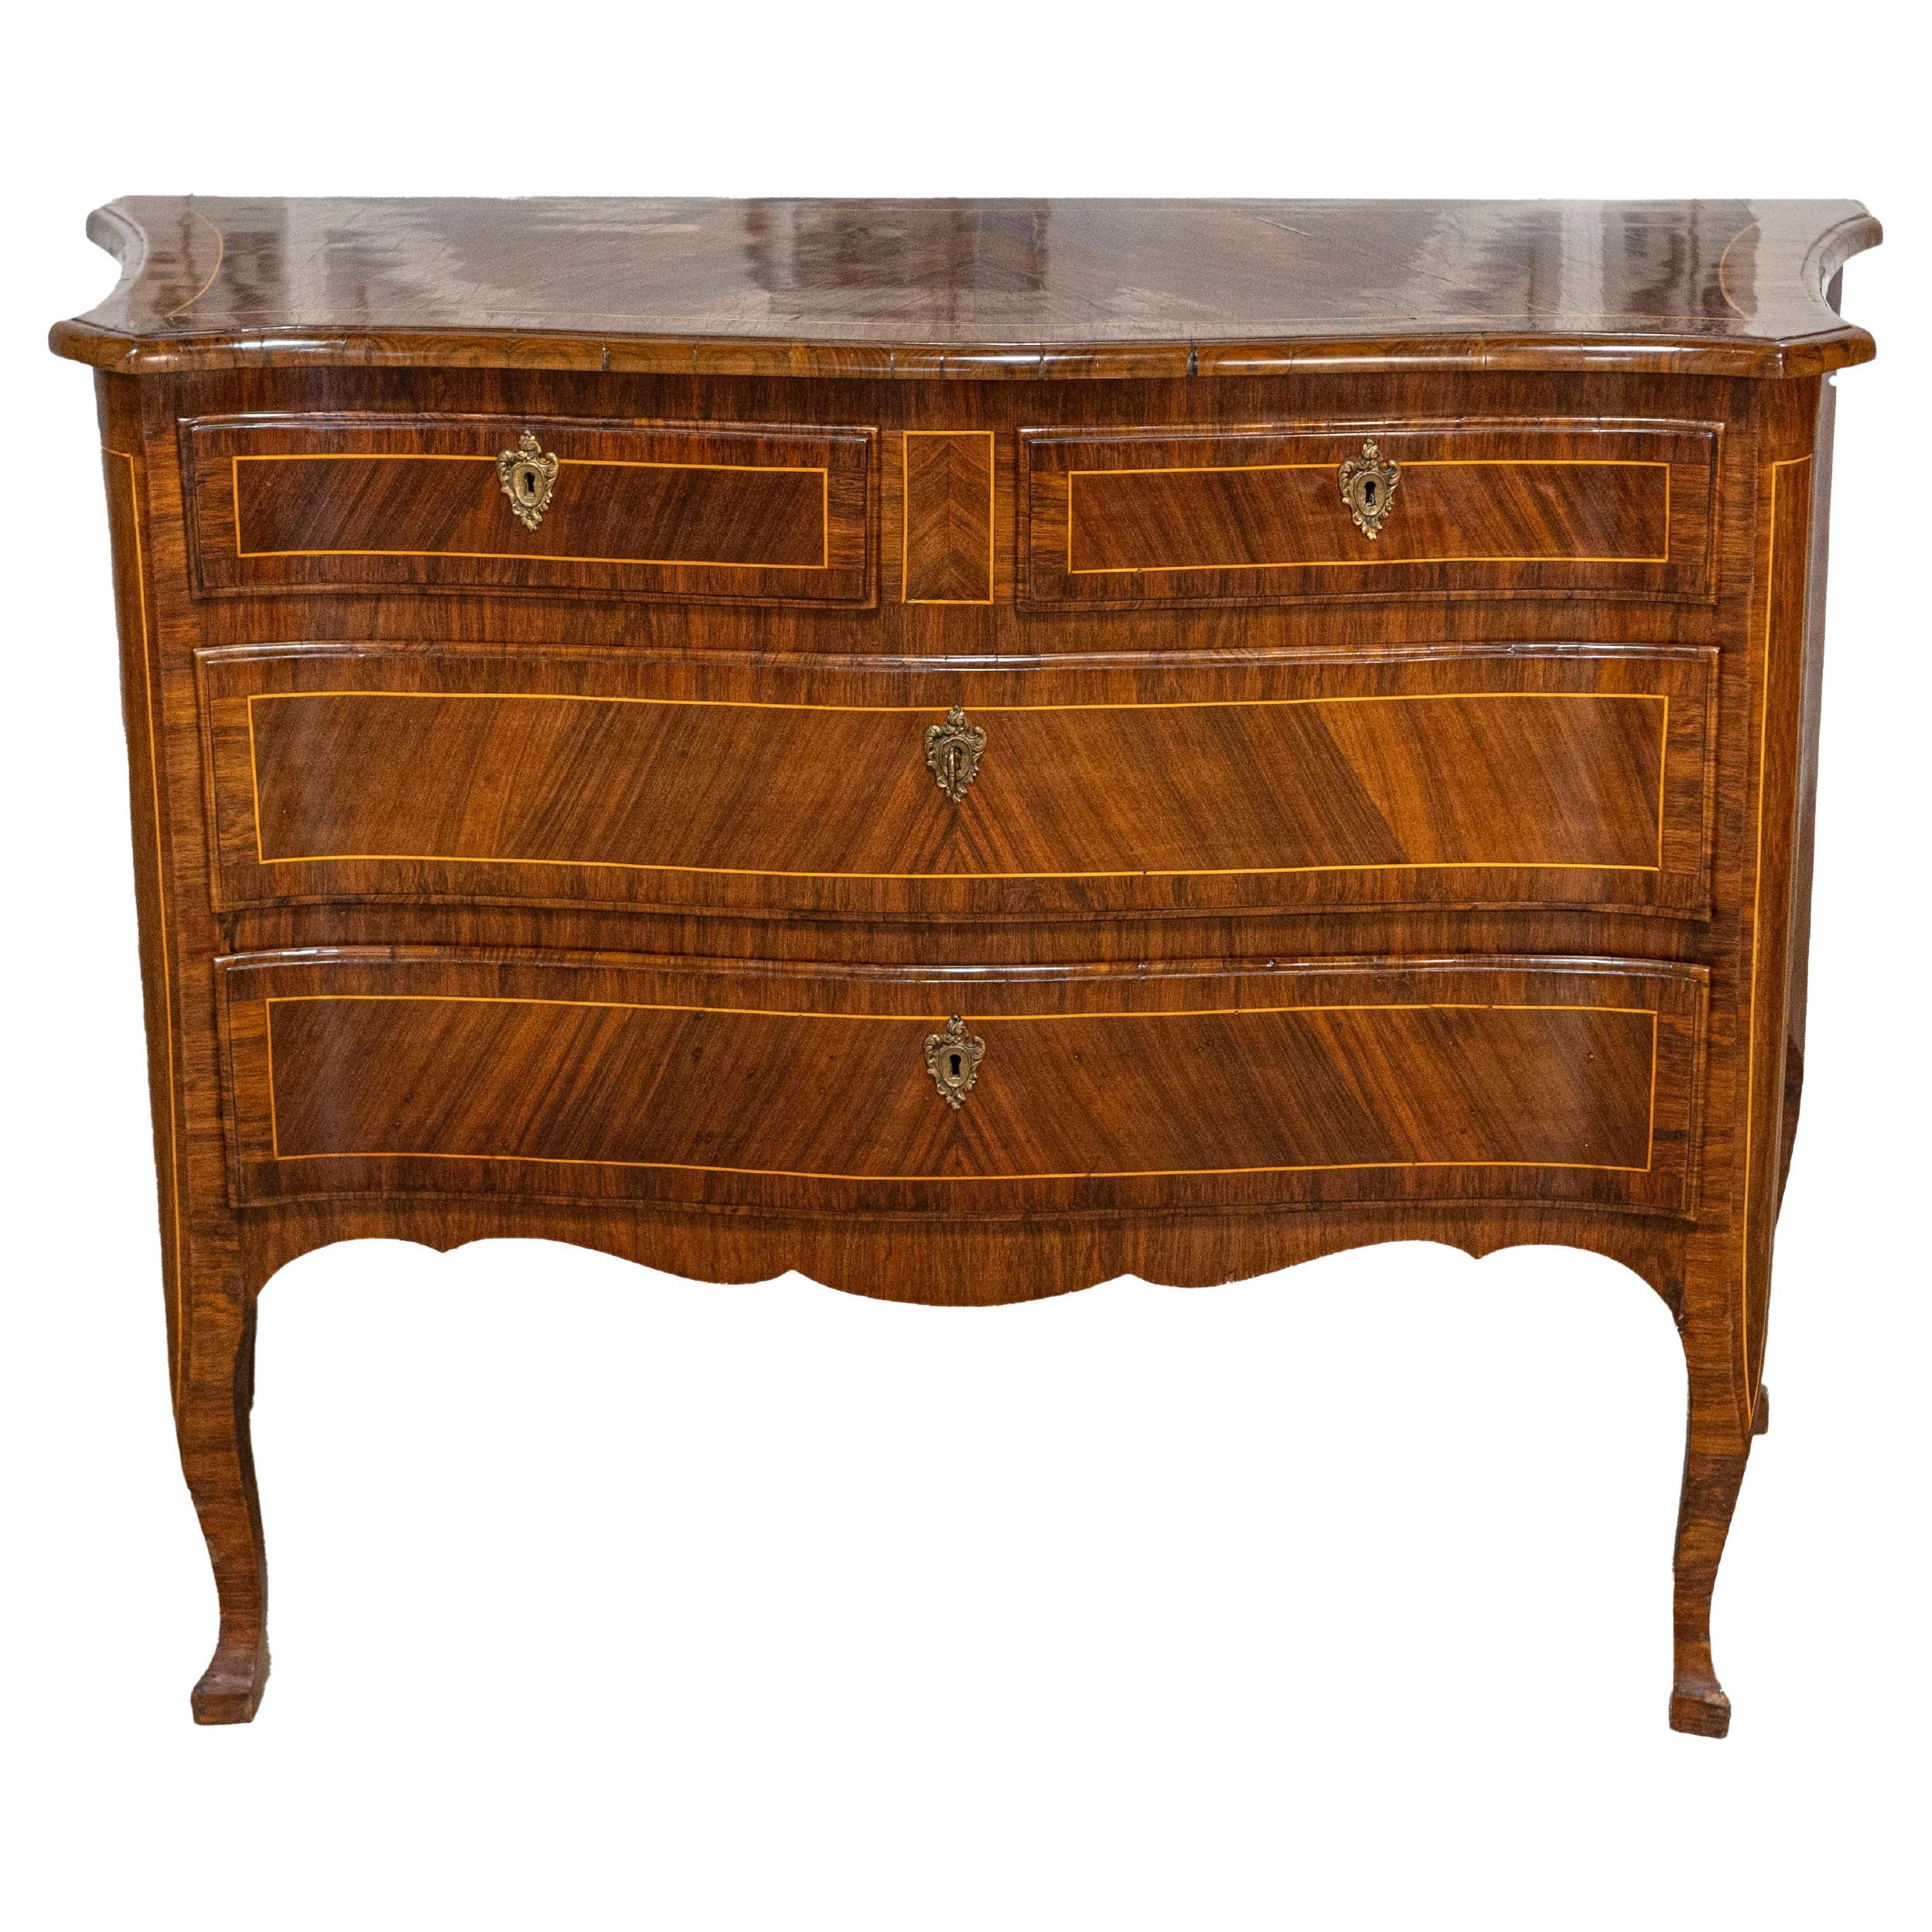 Tuscan 1890s Walnut and Mahogany Four-Drawer Commode with Banding Inlay